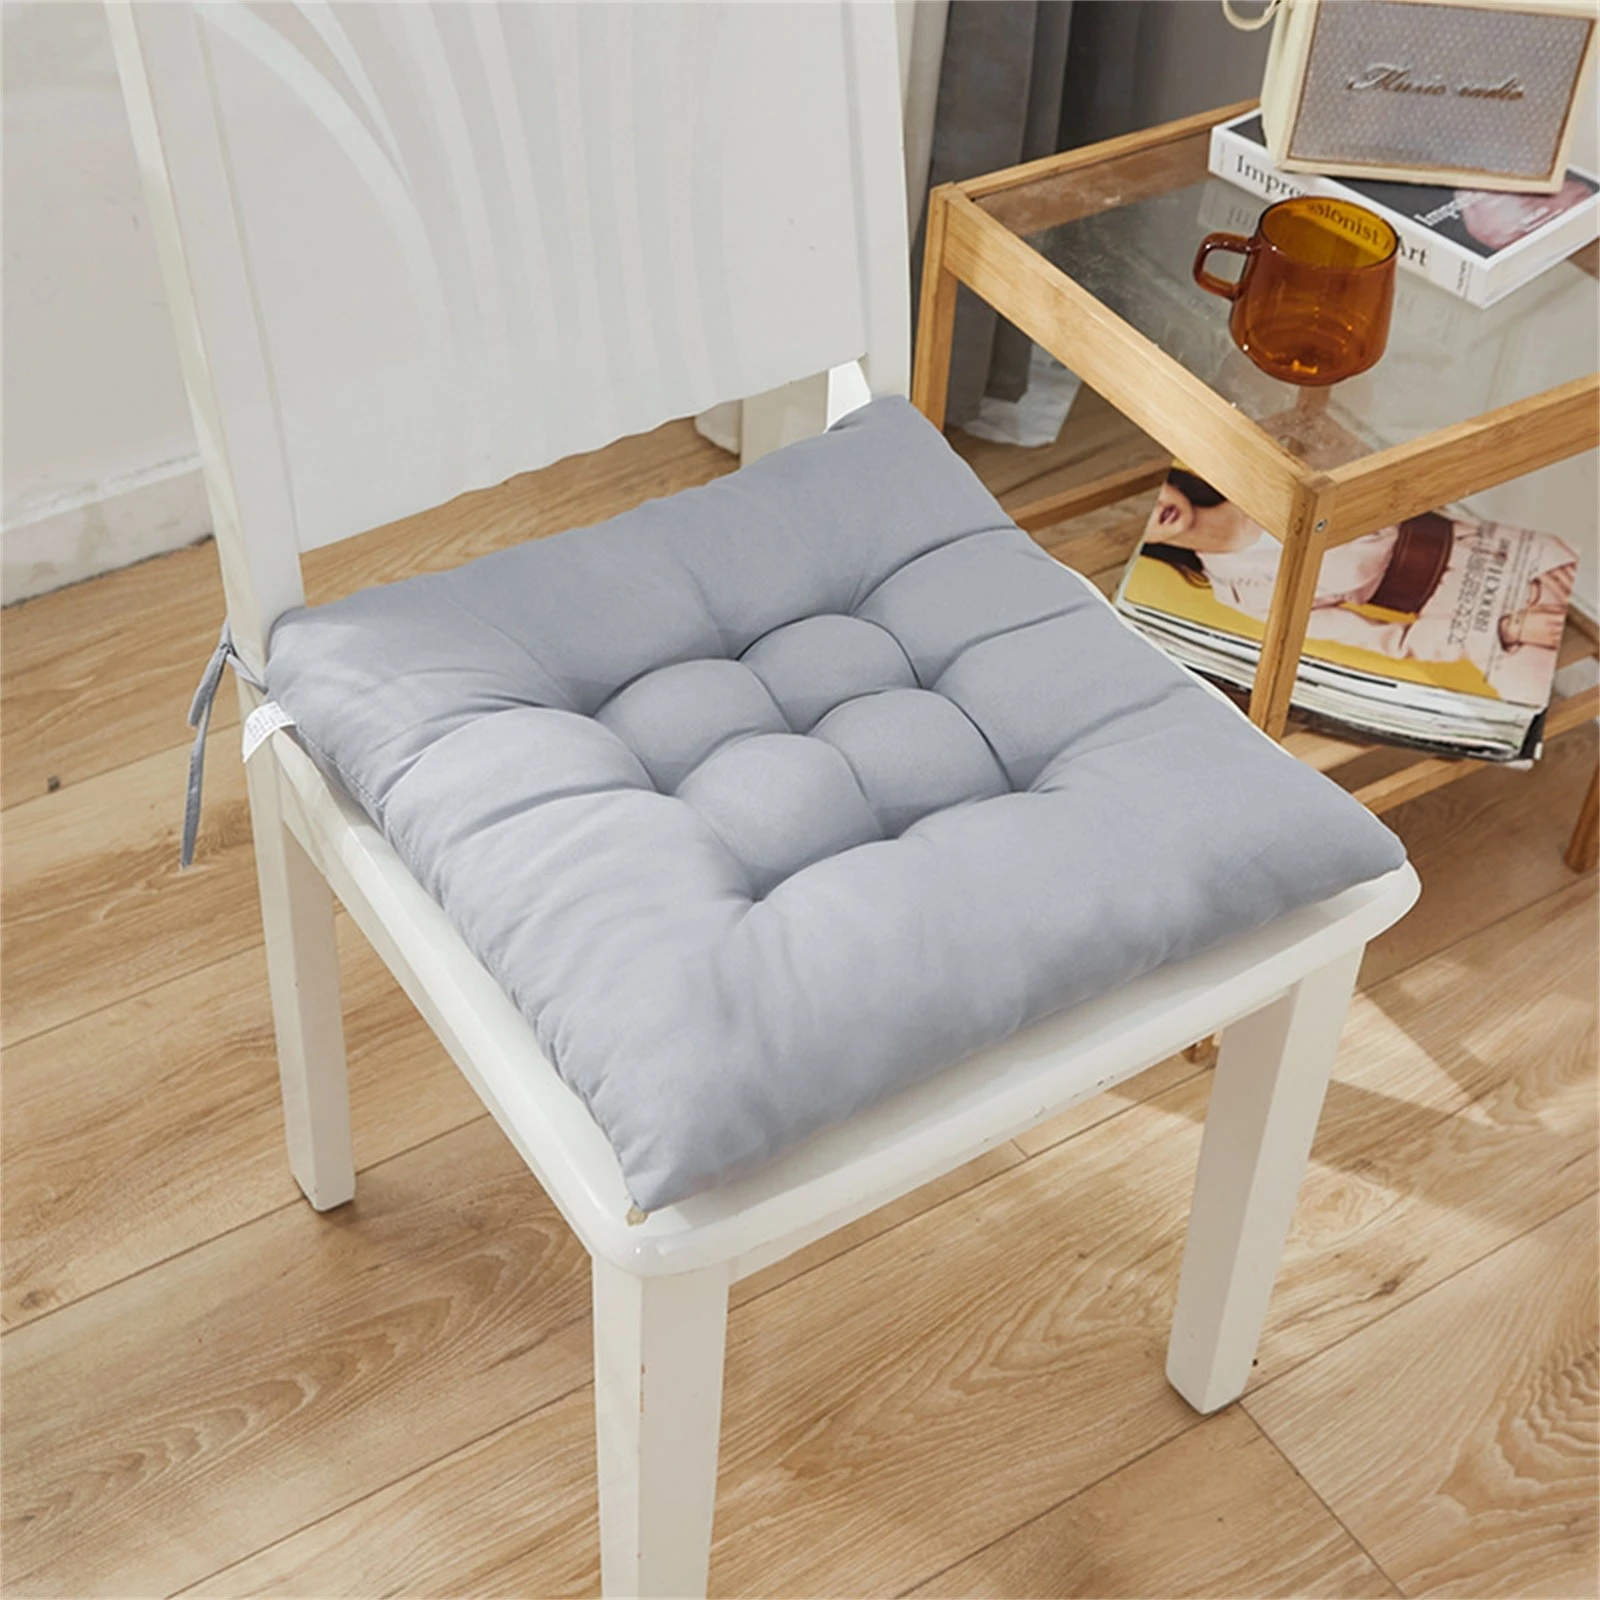 New Arrival Chair Cushion Square Cotton Upholstery Soft Padded Solid Color Sanded Cushion Pad Office Home Or Car Dropshipping